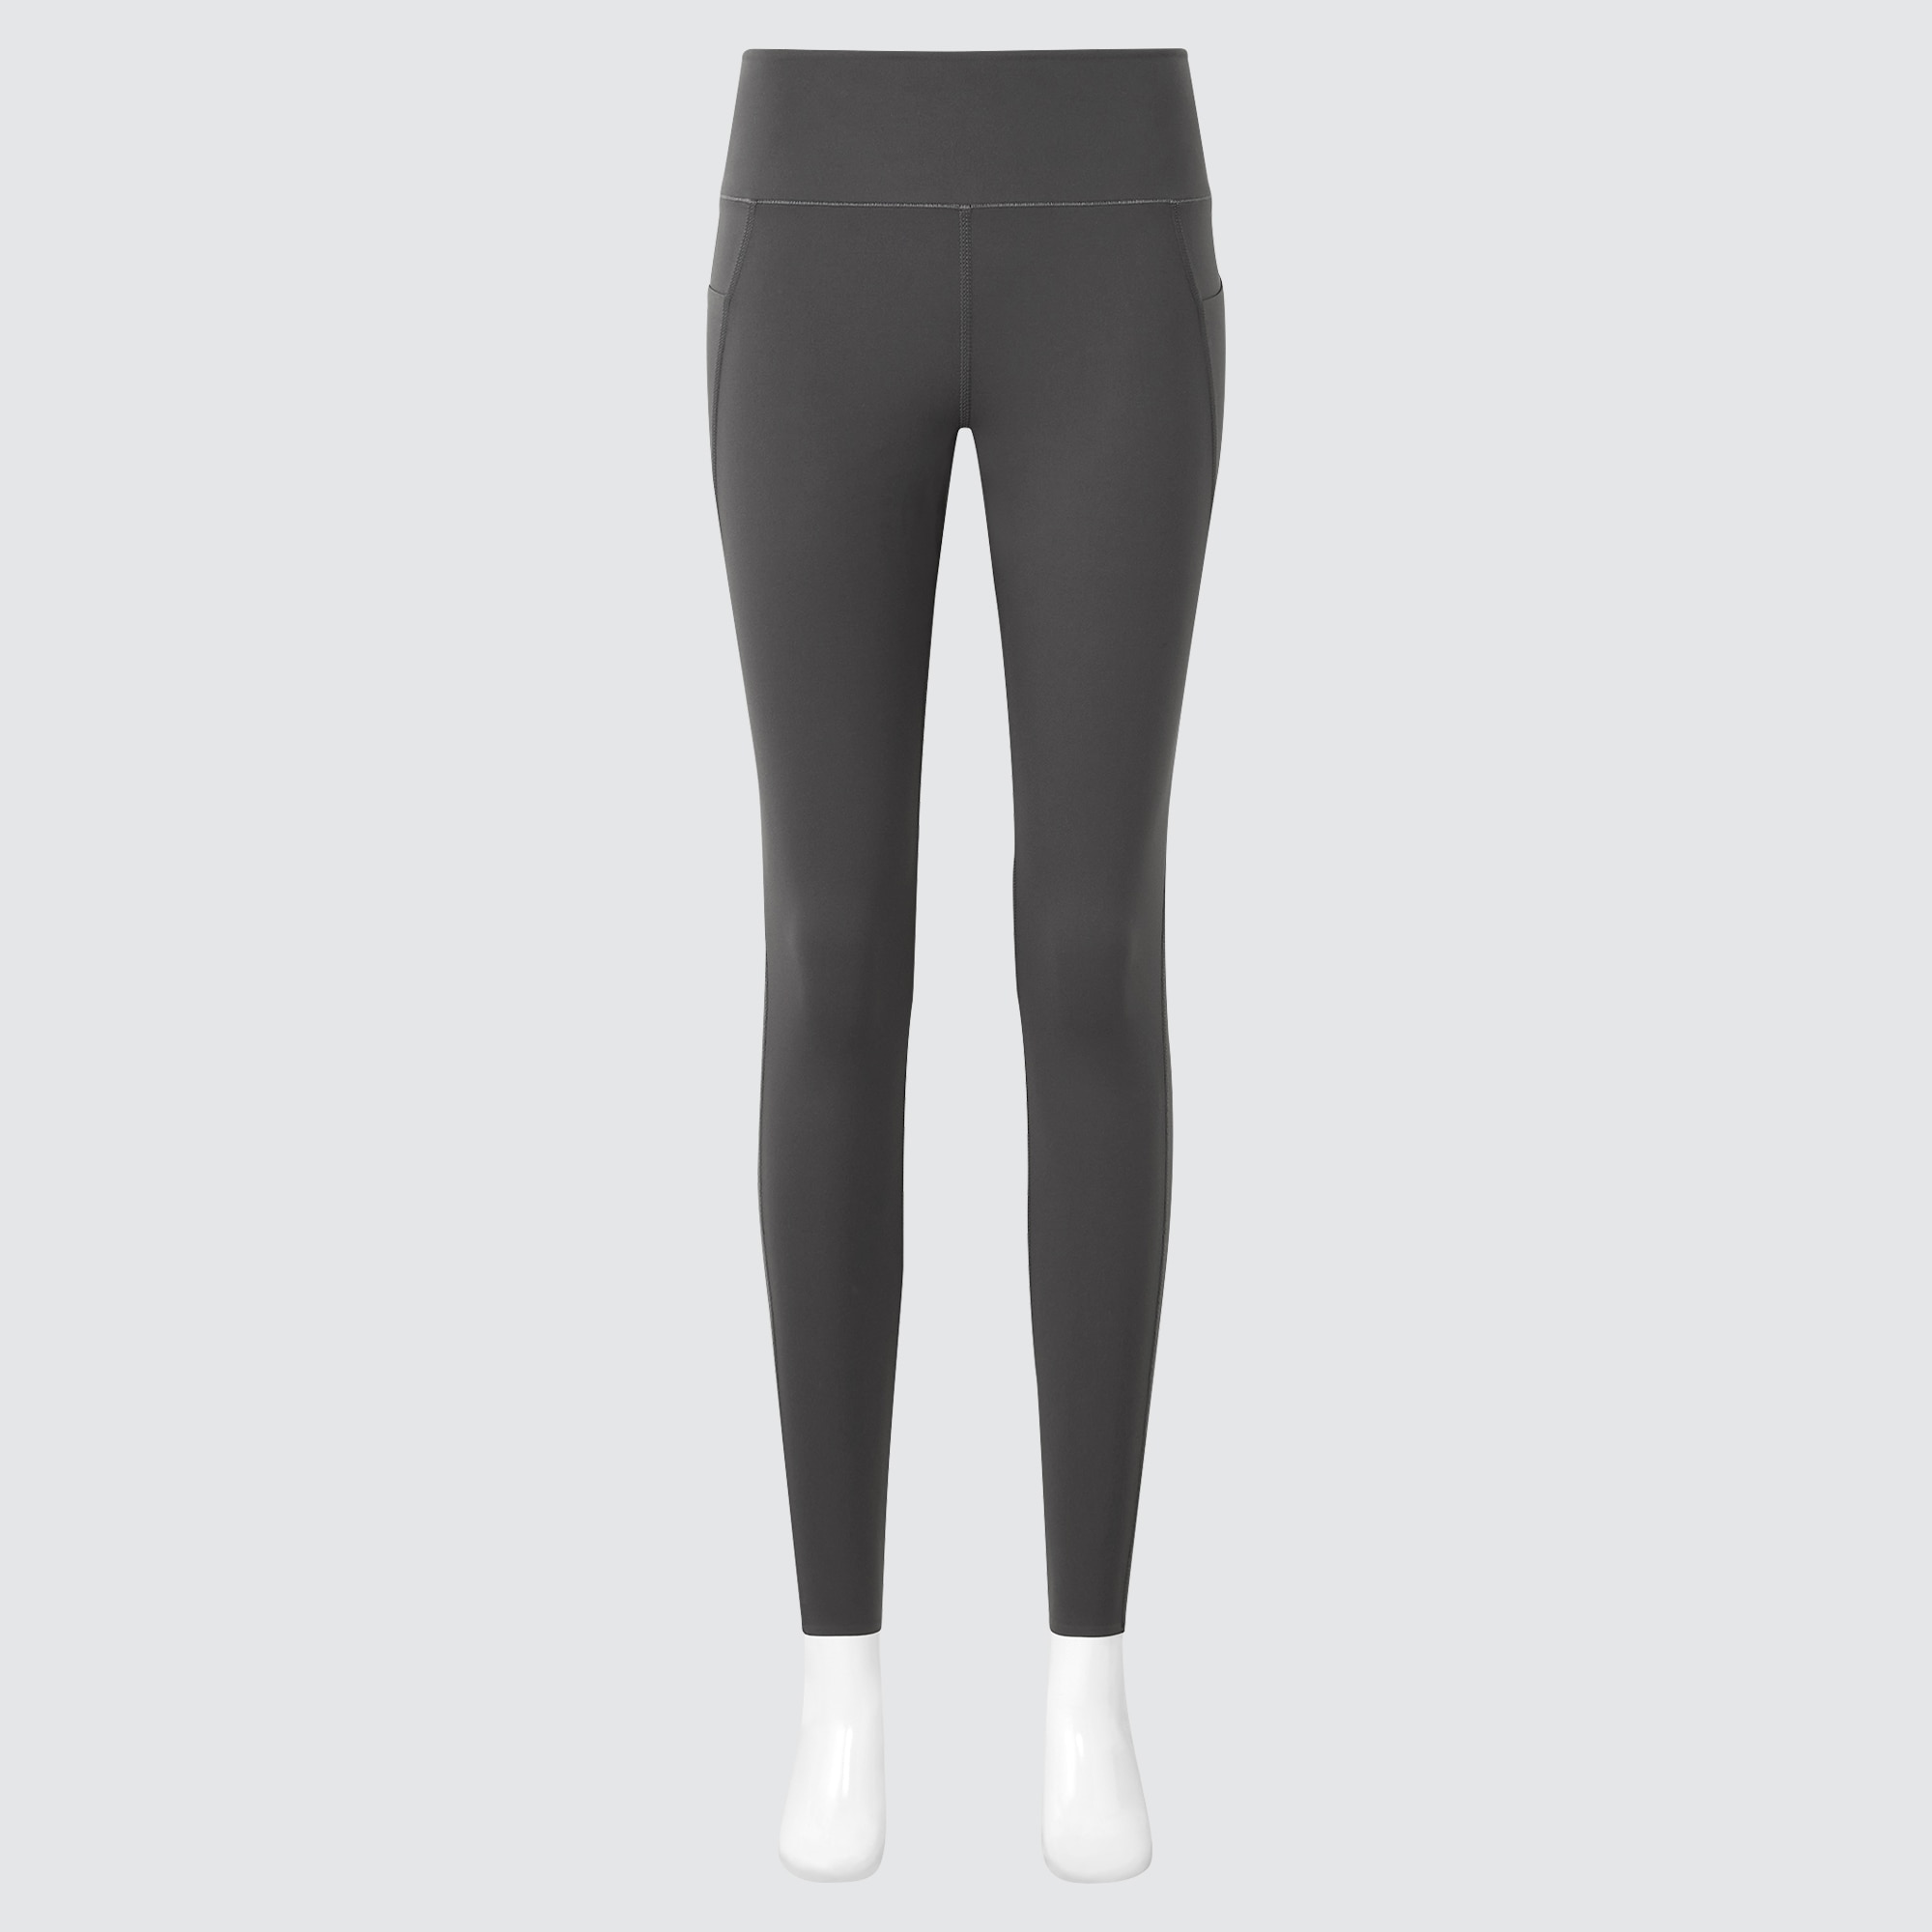 UNIQLO AIRism UV Protection Active Soft Leggings | StyleHint